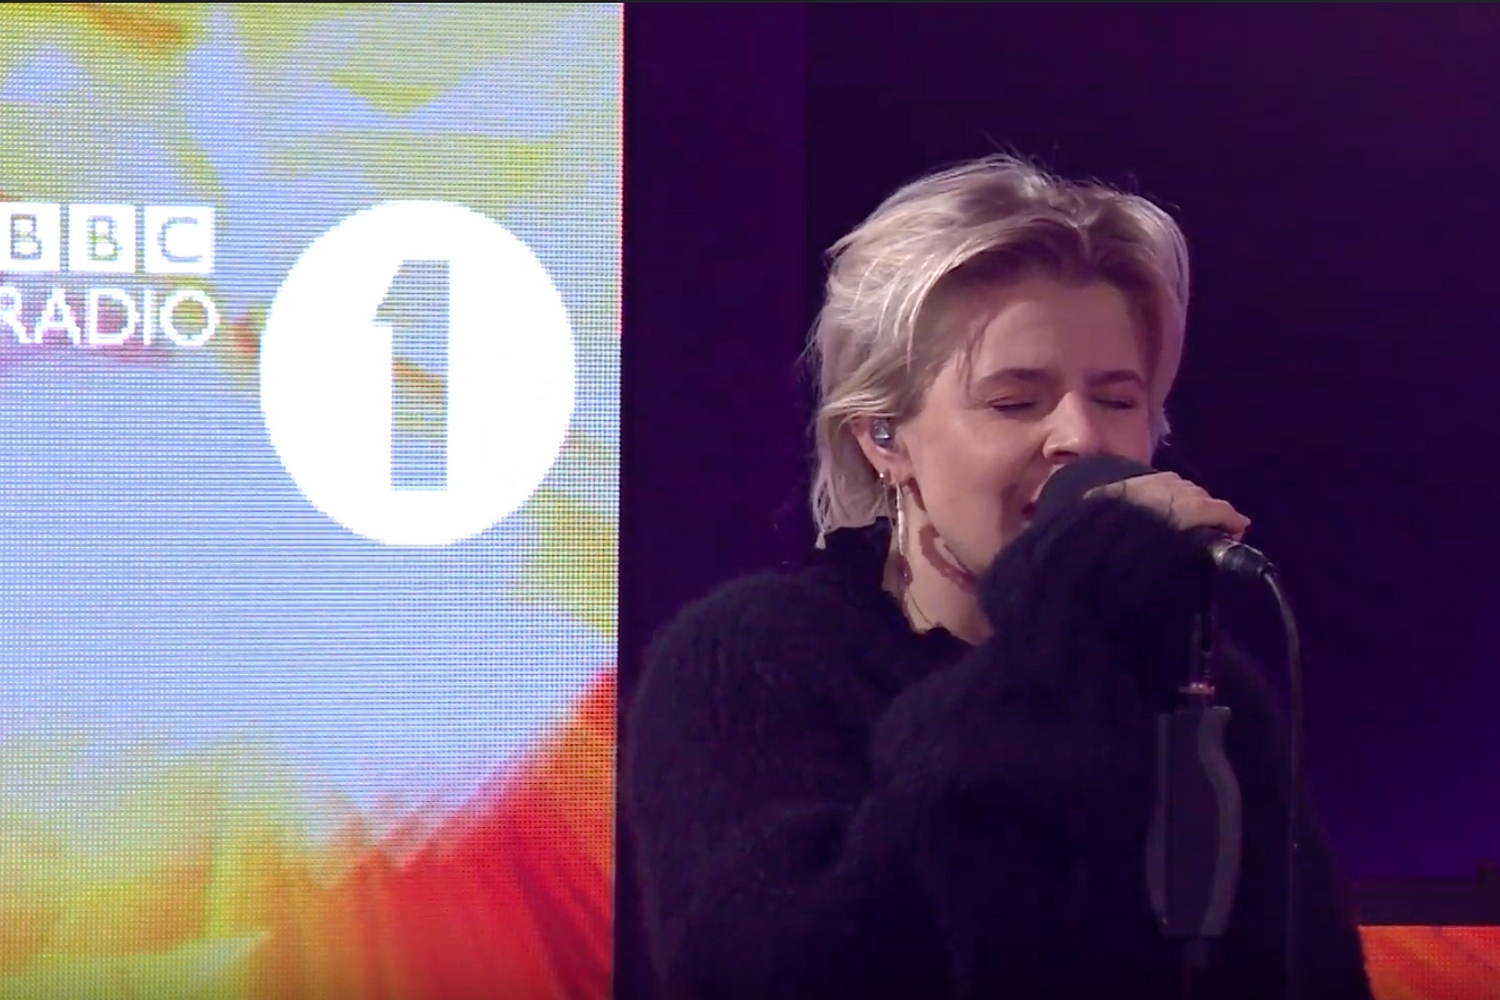 Robyn covers ‘Last Christmas’ and performs ‘Honey’ in the Live Lounge